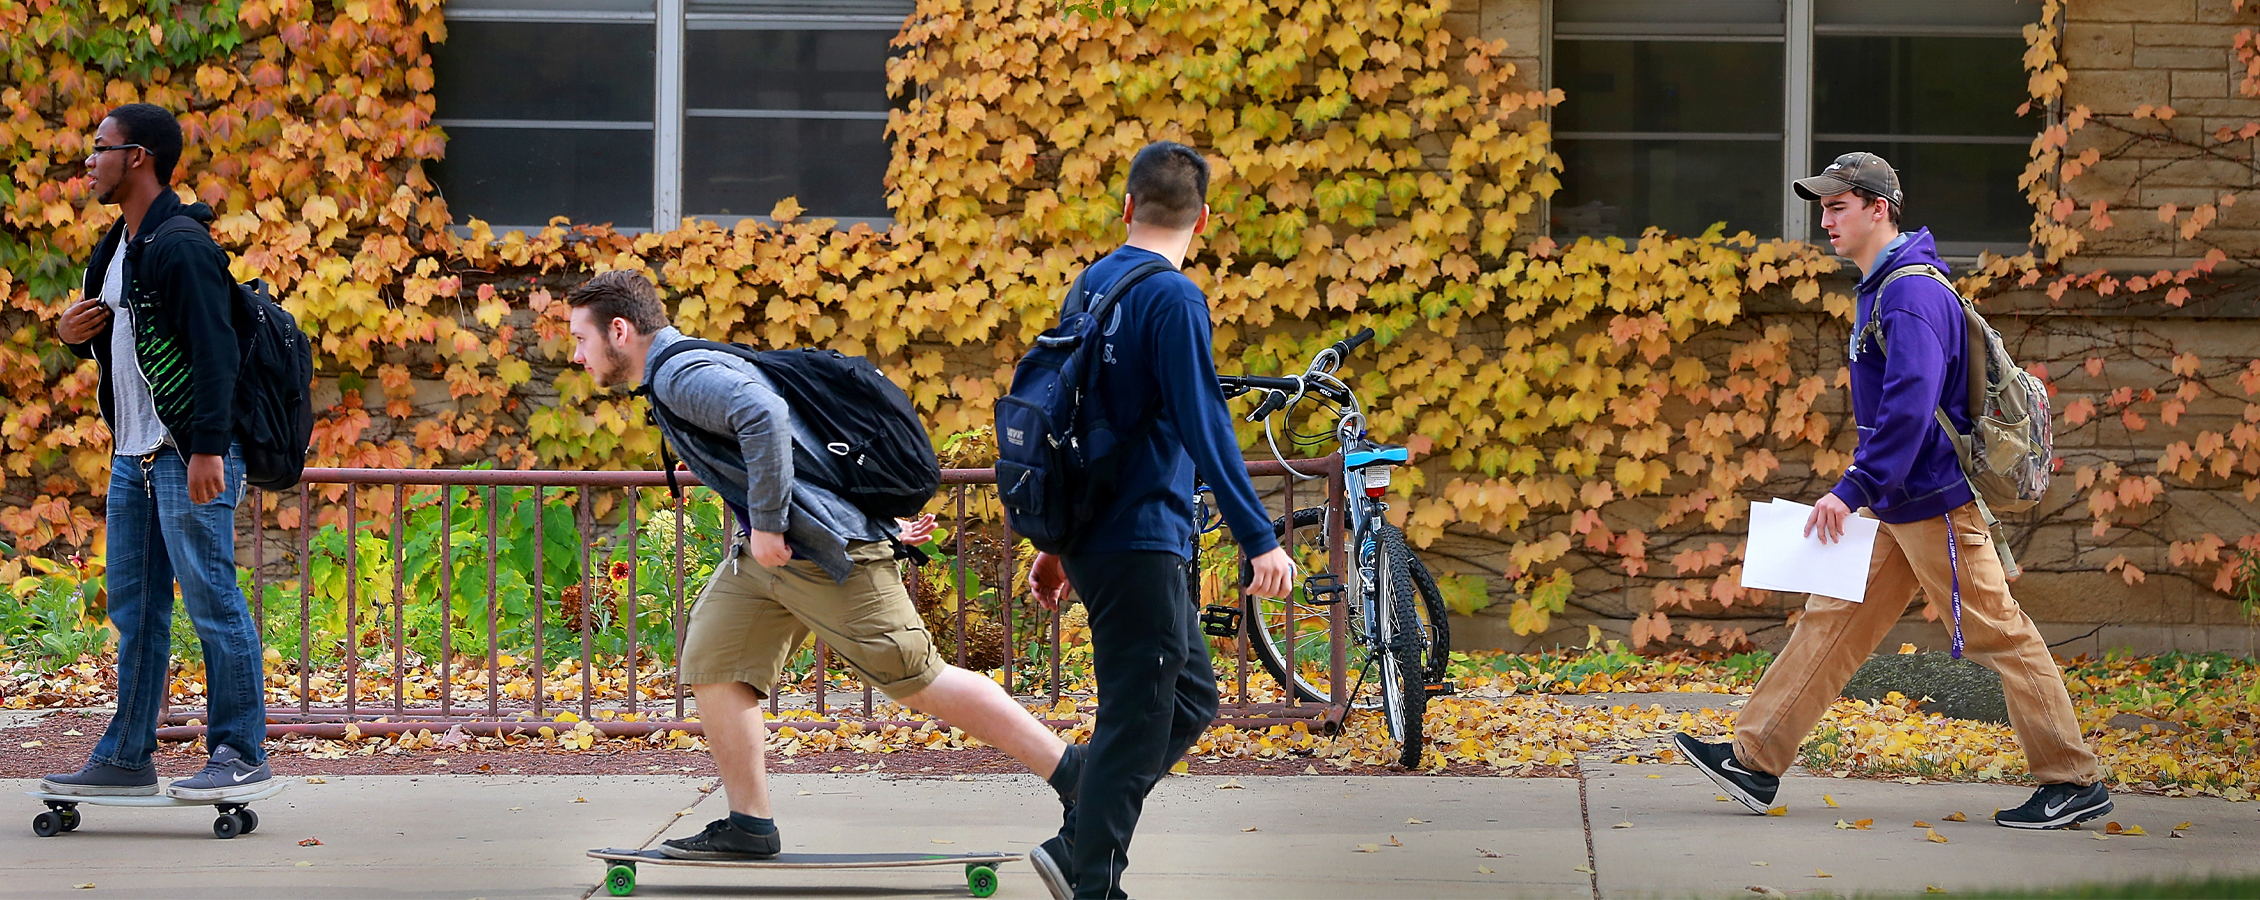 Students skateboard down a sidewalk with yellow foliage and fallen leaves in the background.